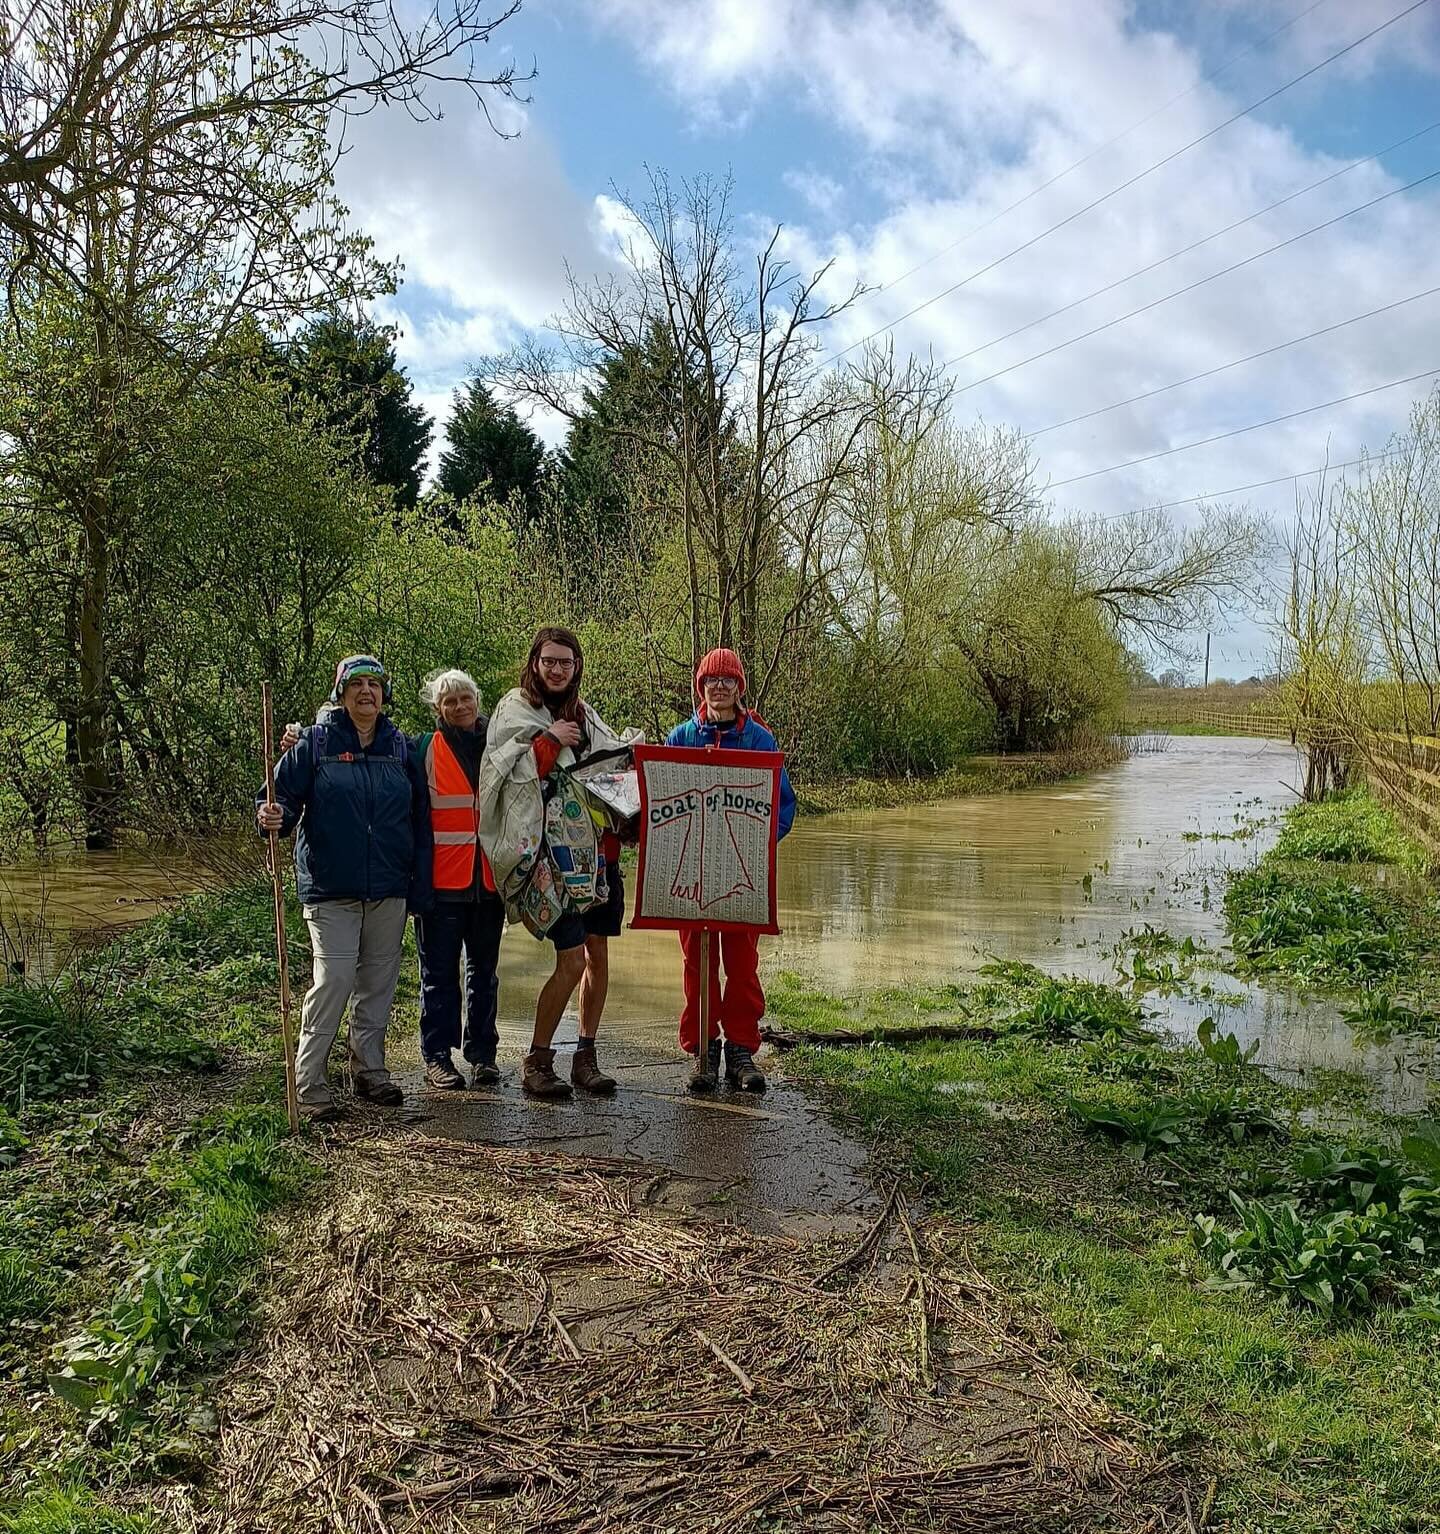 The Coat of Hopes Pilgrims having to be adaptable today to avoid the flooded paths on the way from Shipton to York. Once there the Coat of Hopes was welcomed in York Minster. #coatofhopes #walk9